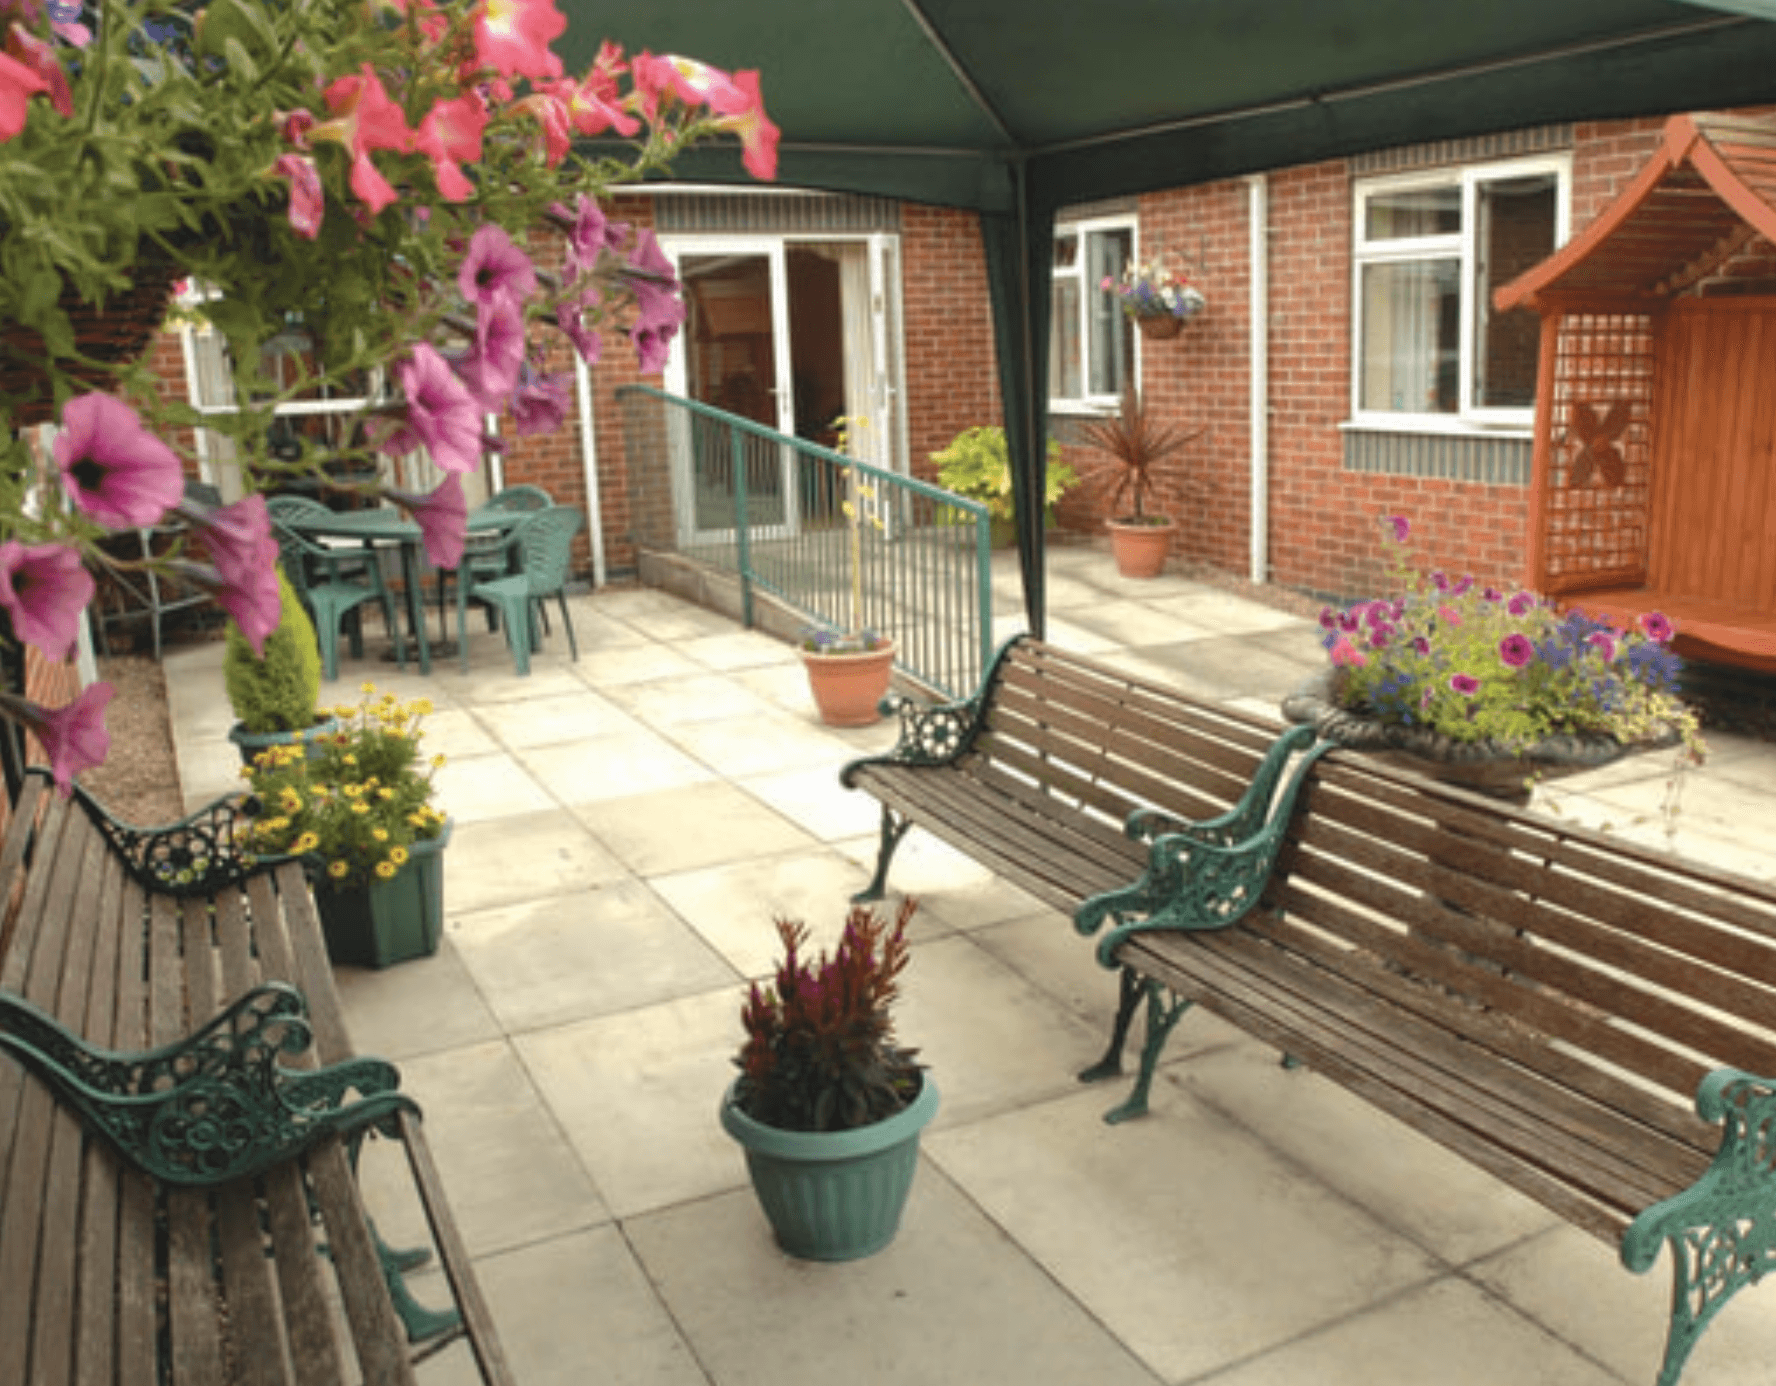 Garden of Moorgate Hollow care home in Rotherham